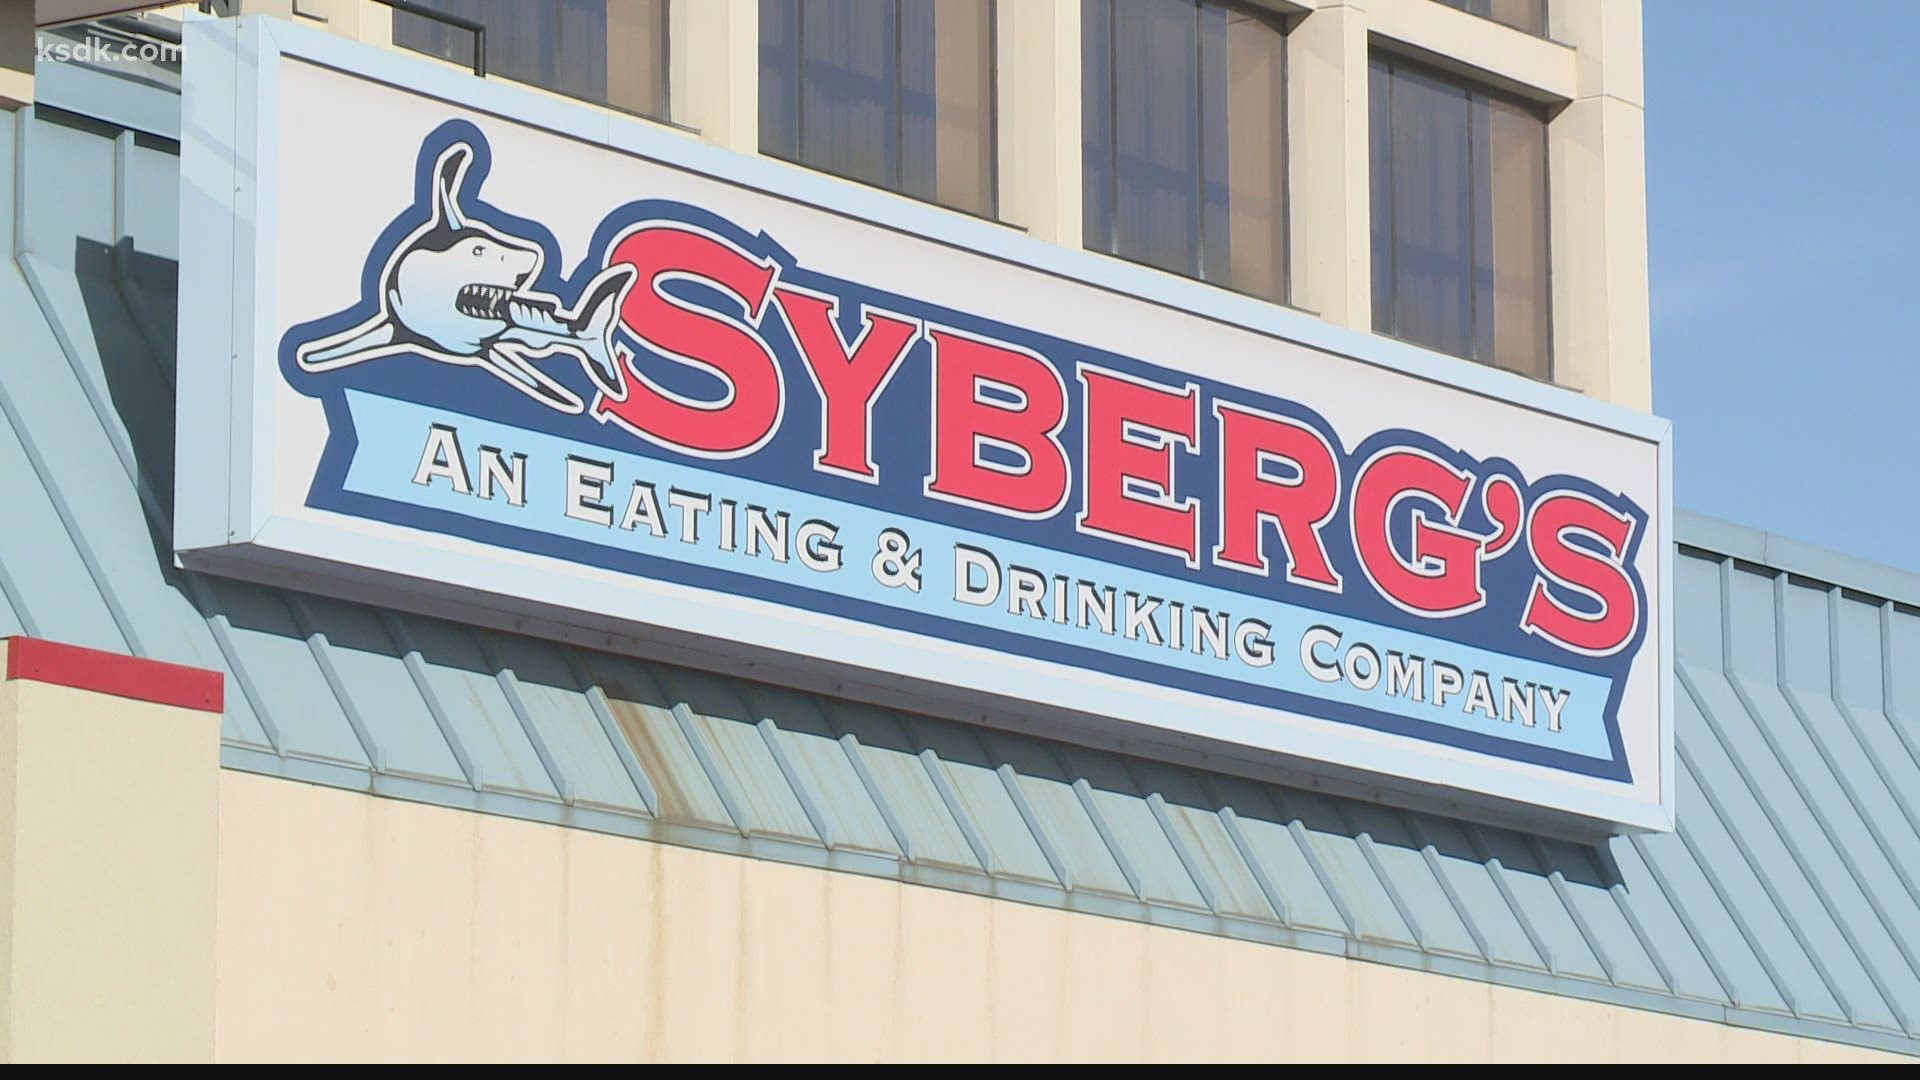 Next month, Syberg's plans to open a casual dining spinoff called Twisted Tavern